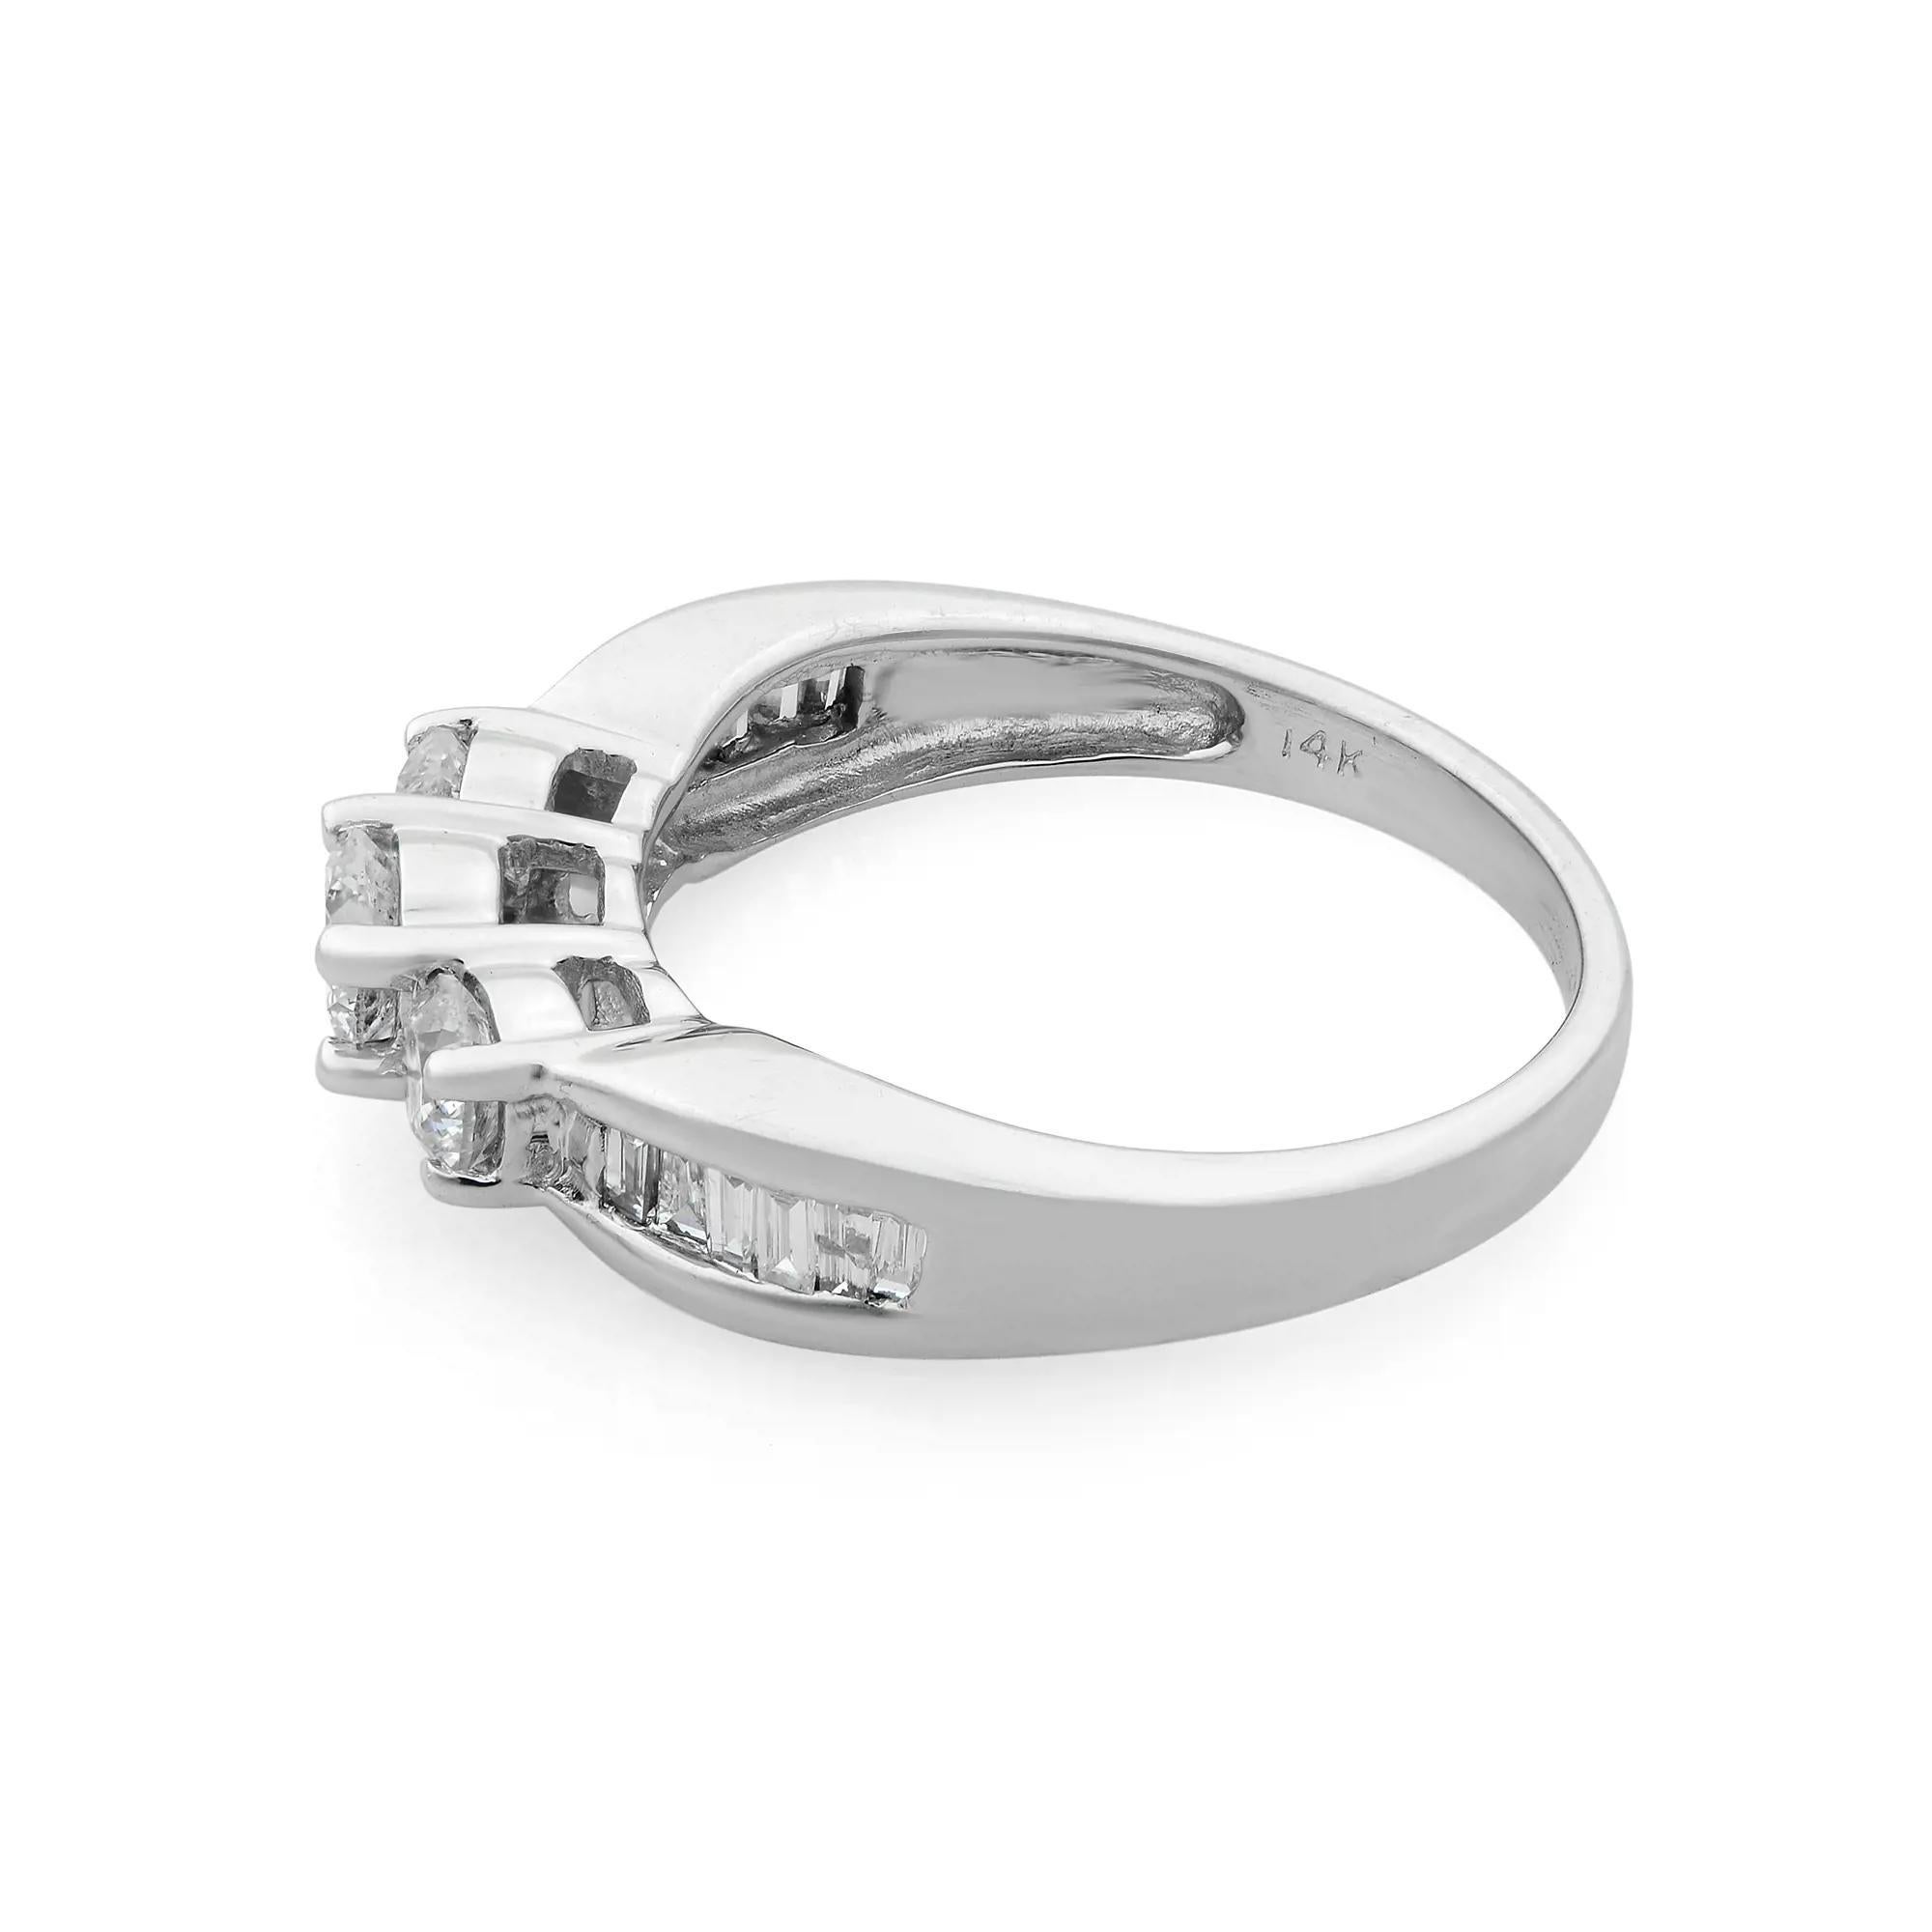 Modern 0.75Cttw Round & Baguette Cut Diamond Wedding Band Ring 14K White Gold Size 7 For Sale